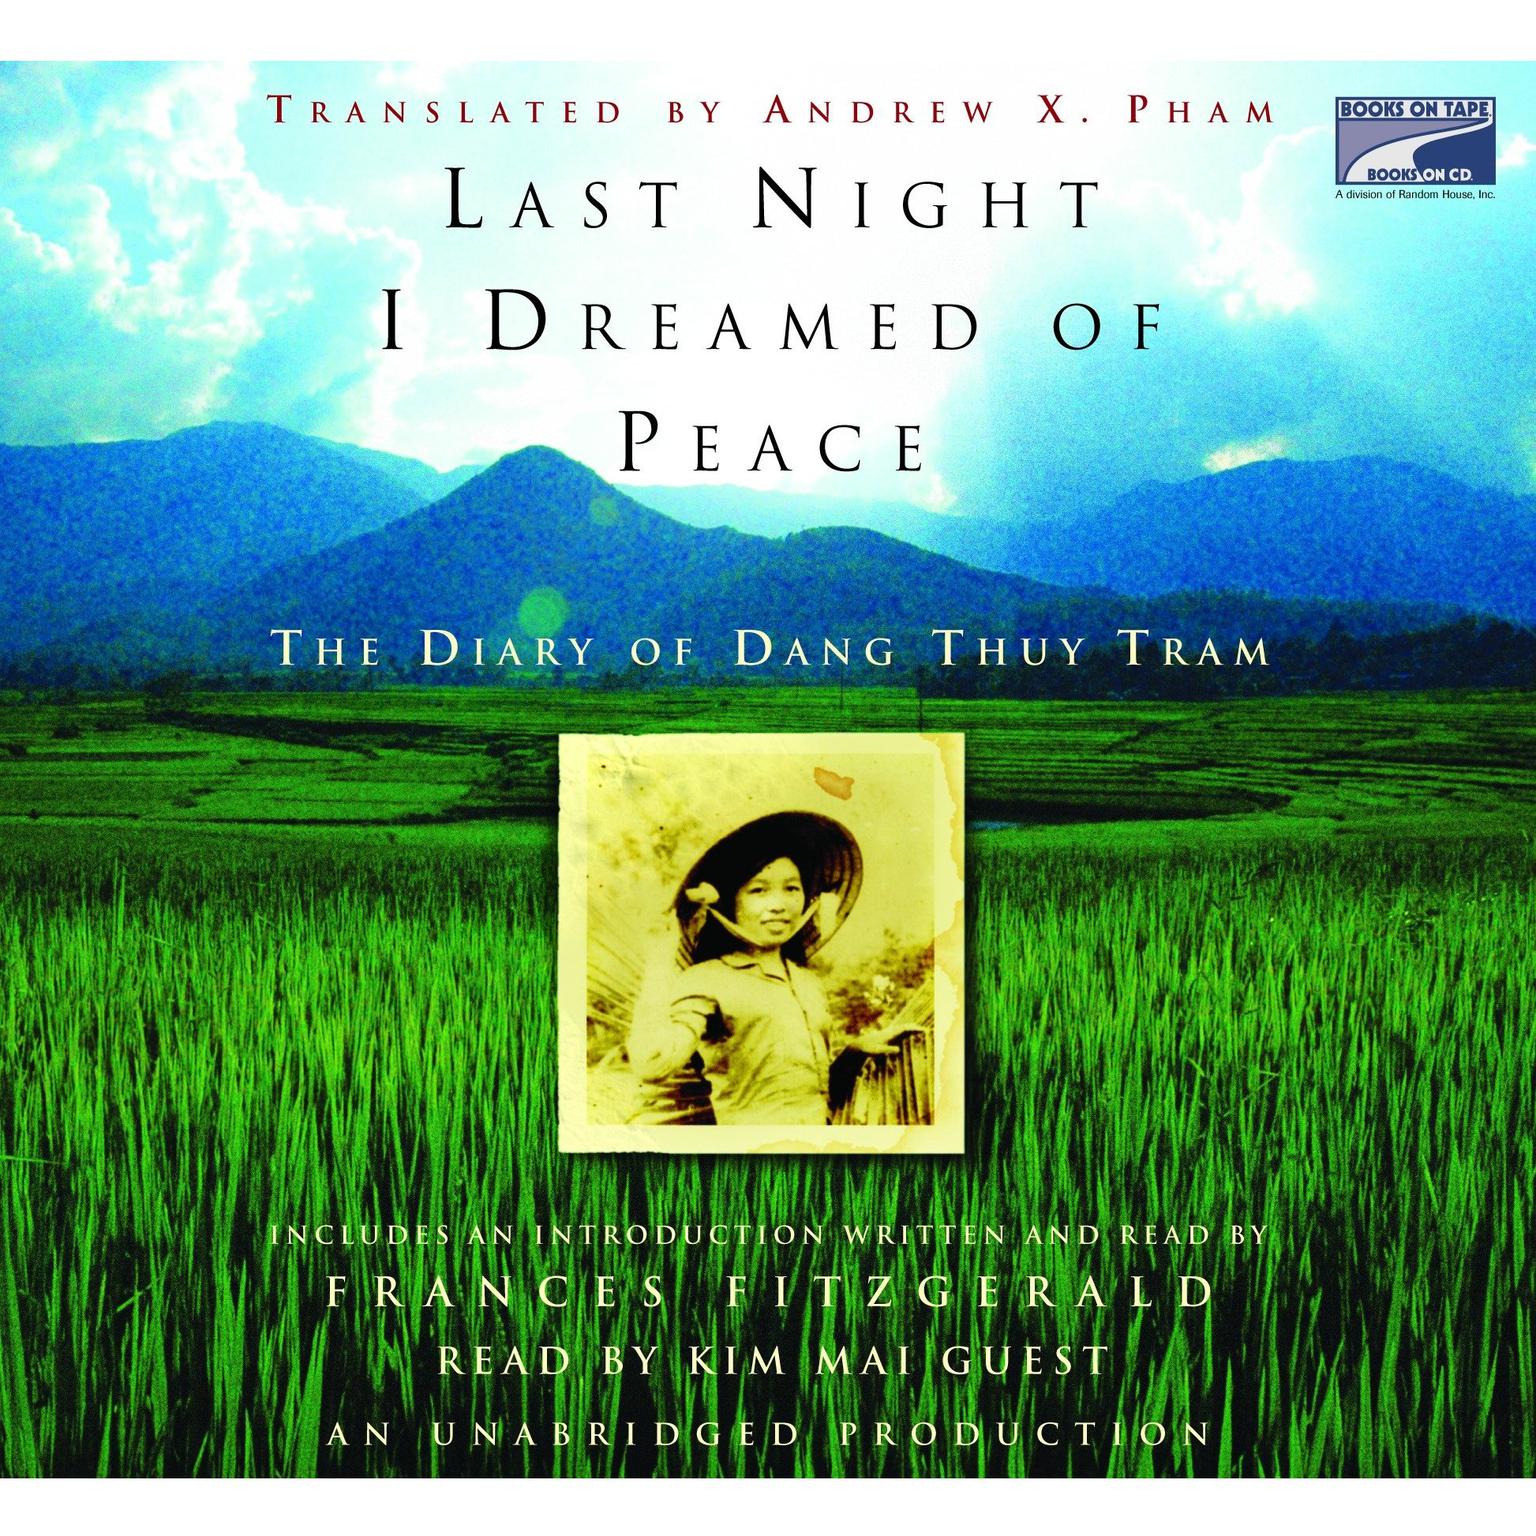 Last Night I Dreamed of Peace (Abridged): The Diary of Dang Thuy Tram Audiobook, by Dang Thuy Tram